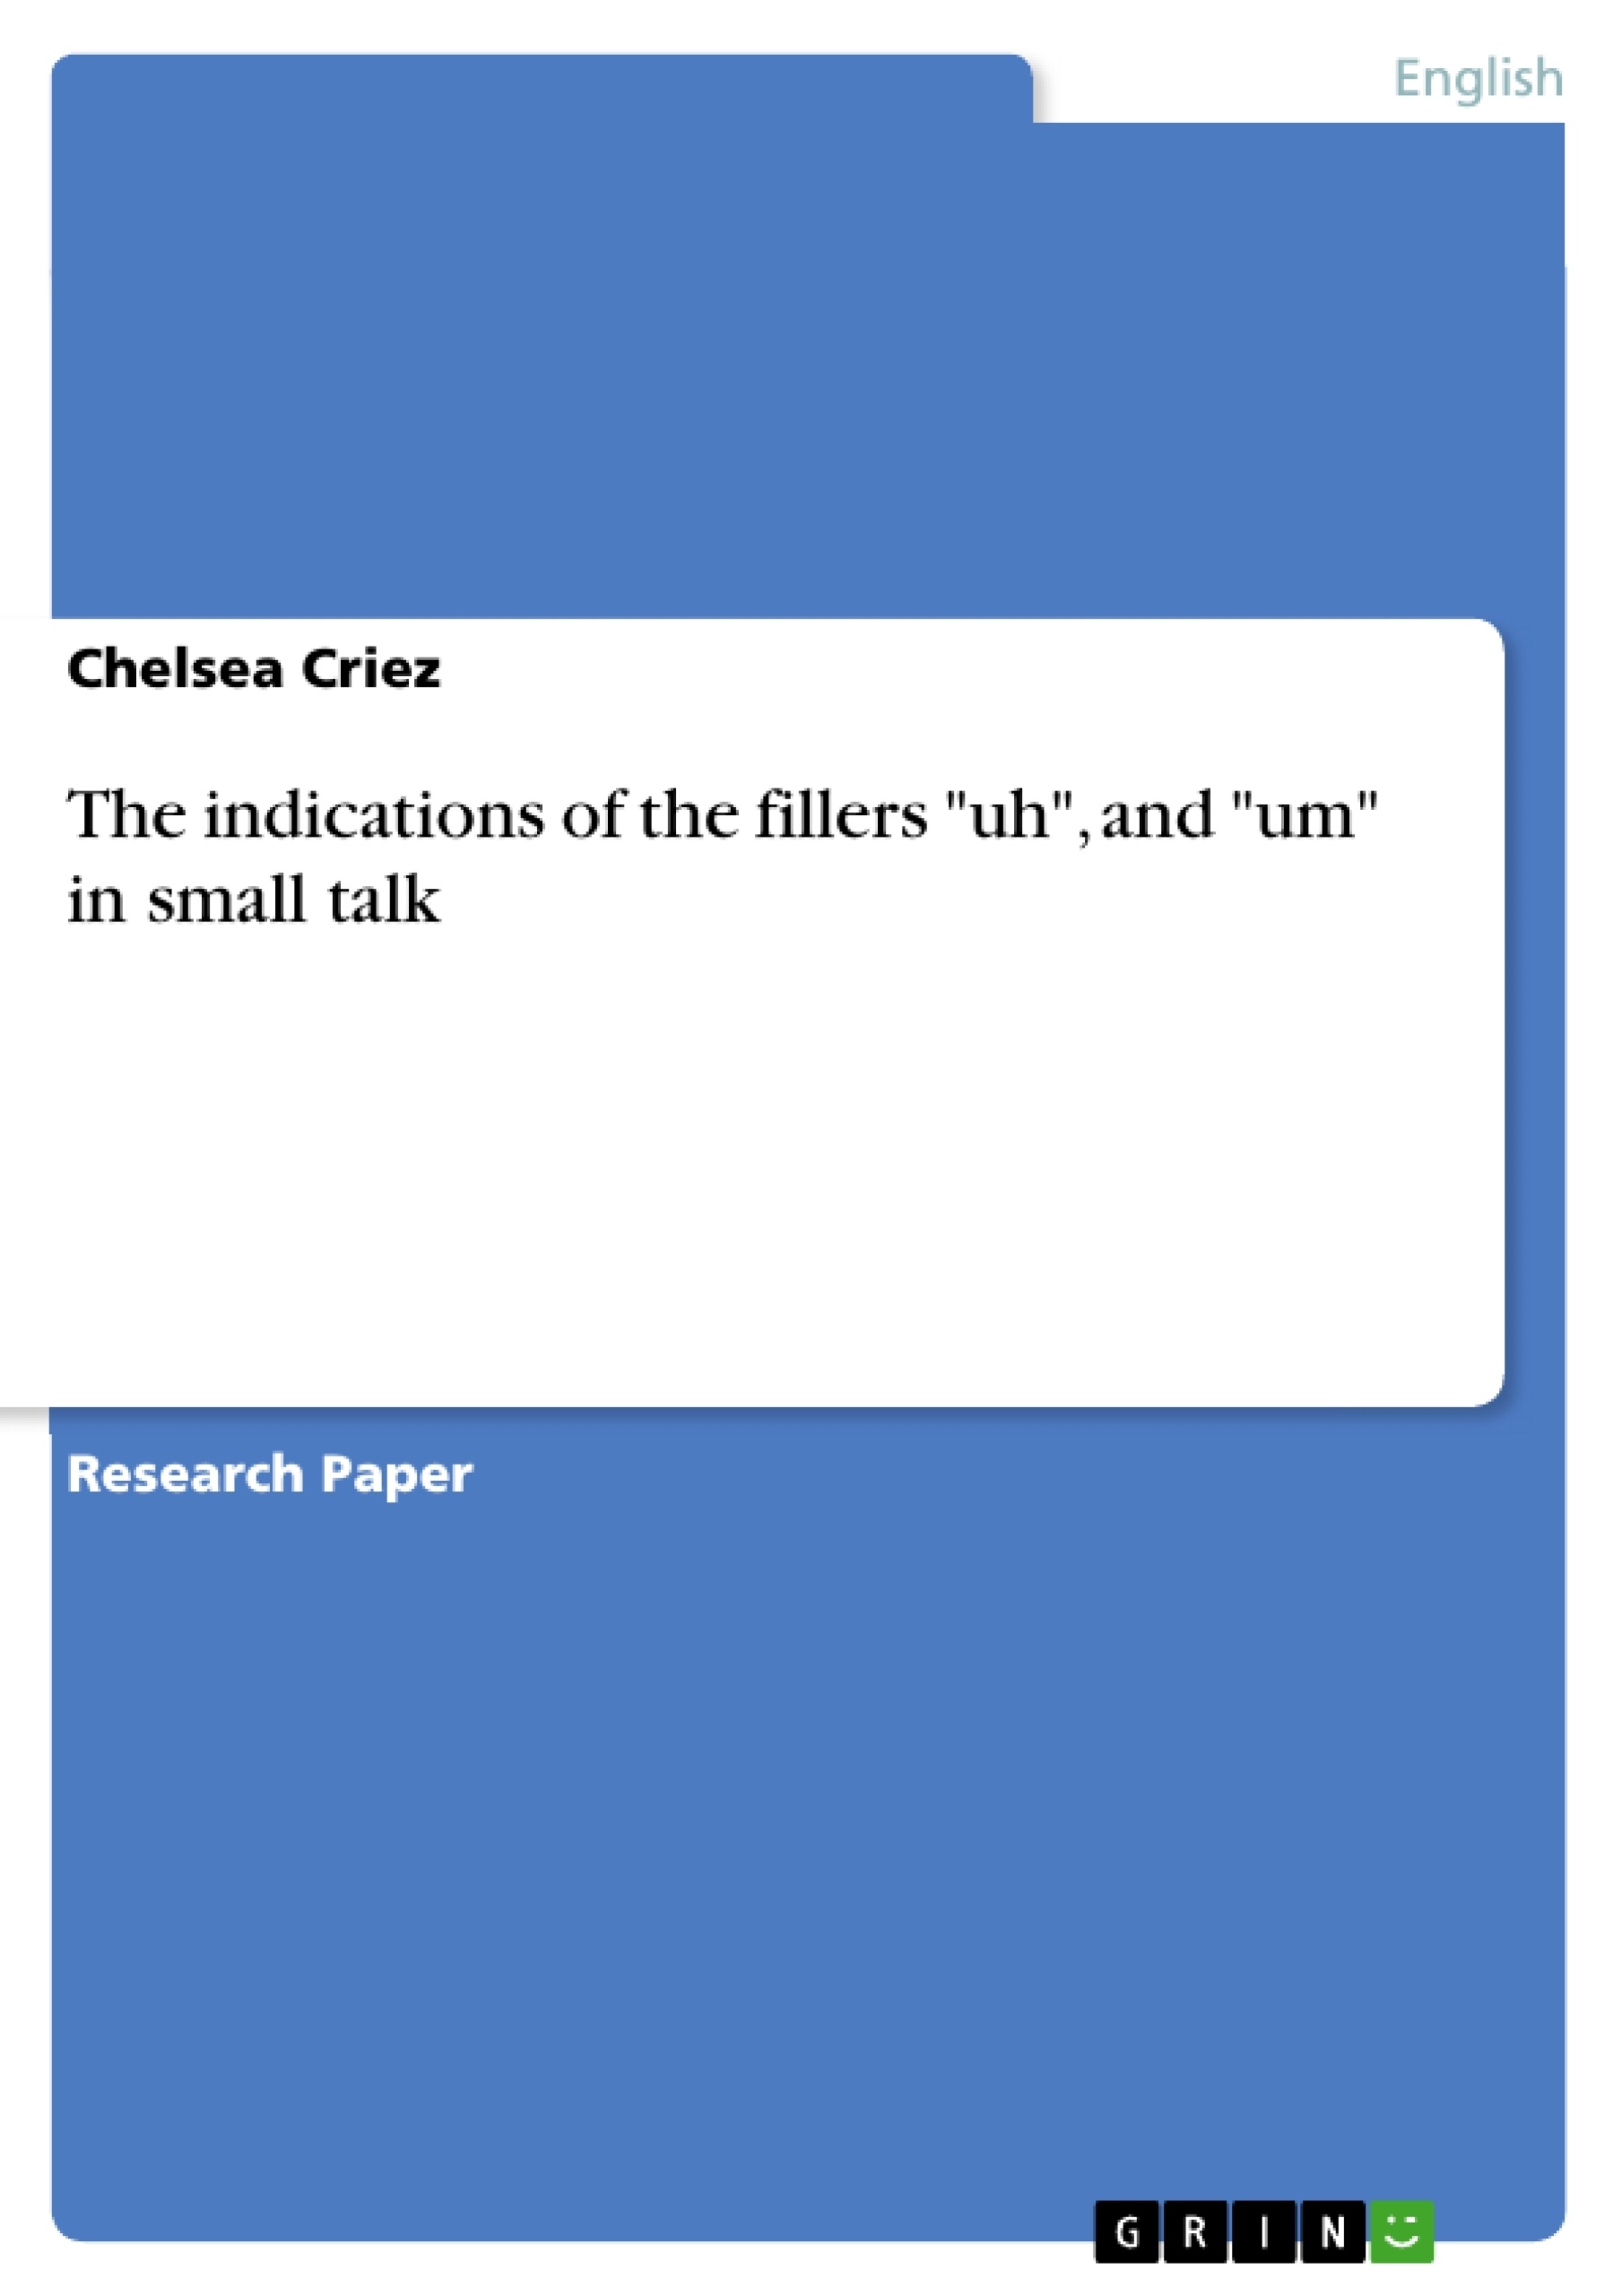 Title: The indications of the fillers "uh", and "um" in small talk